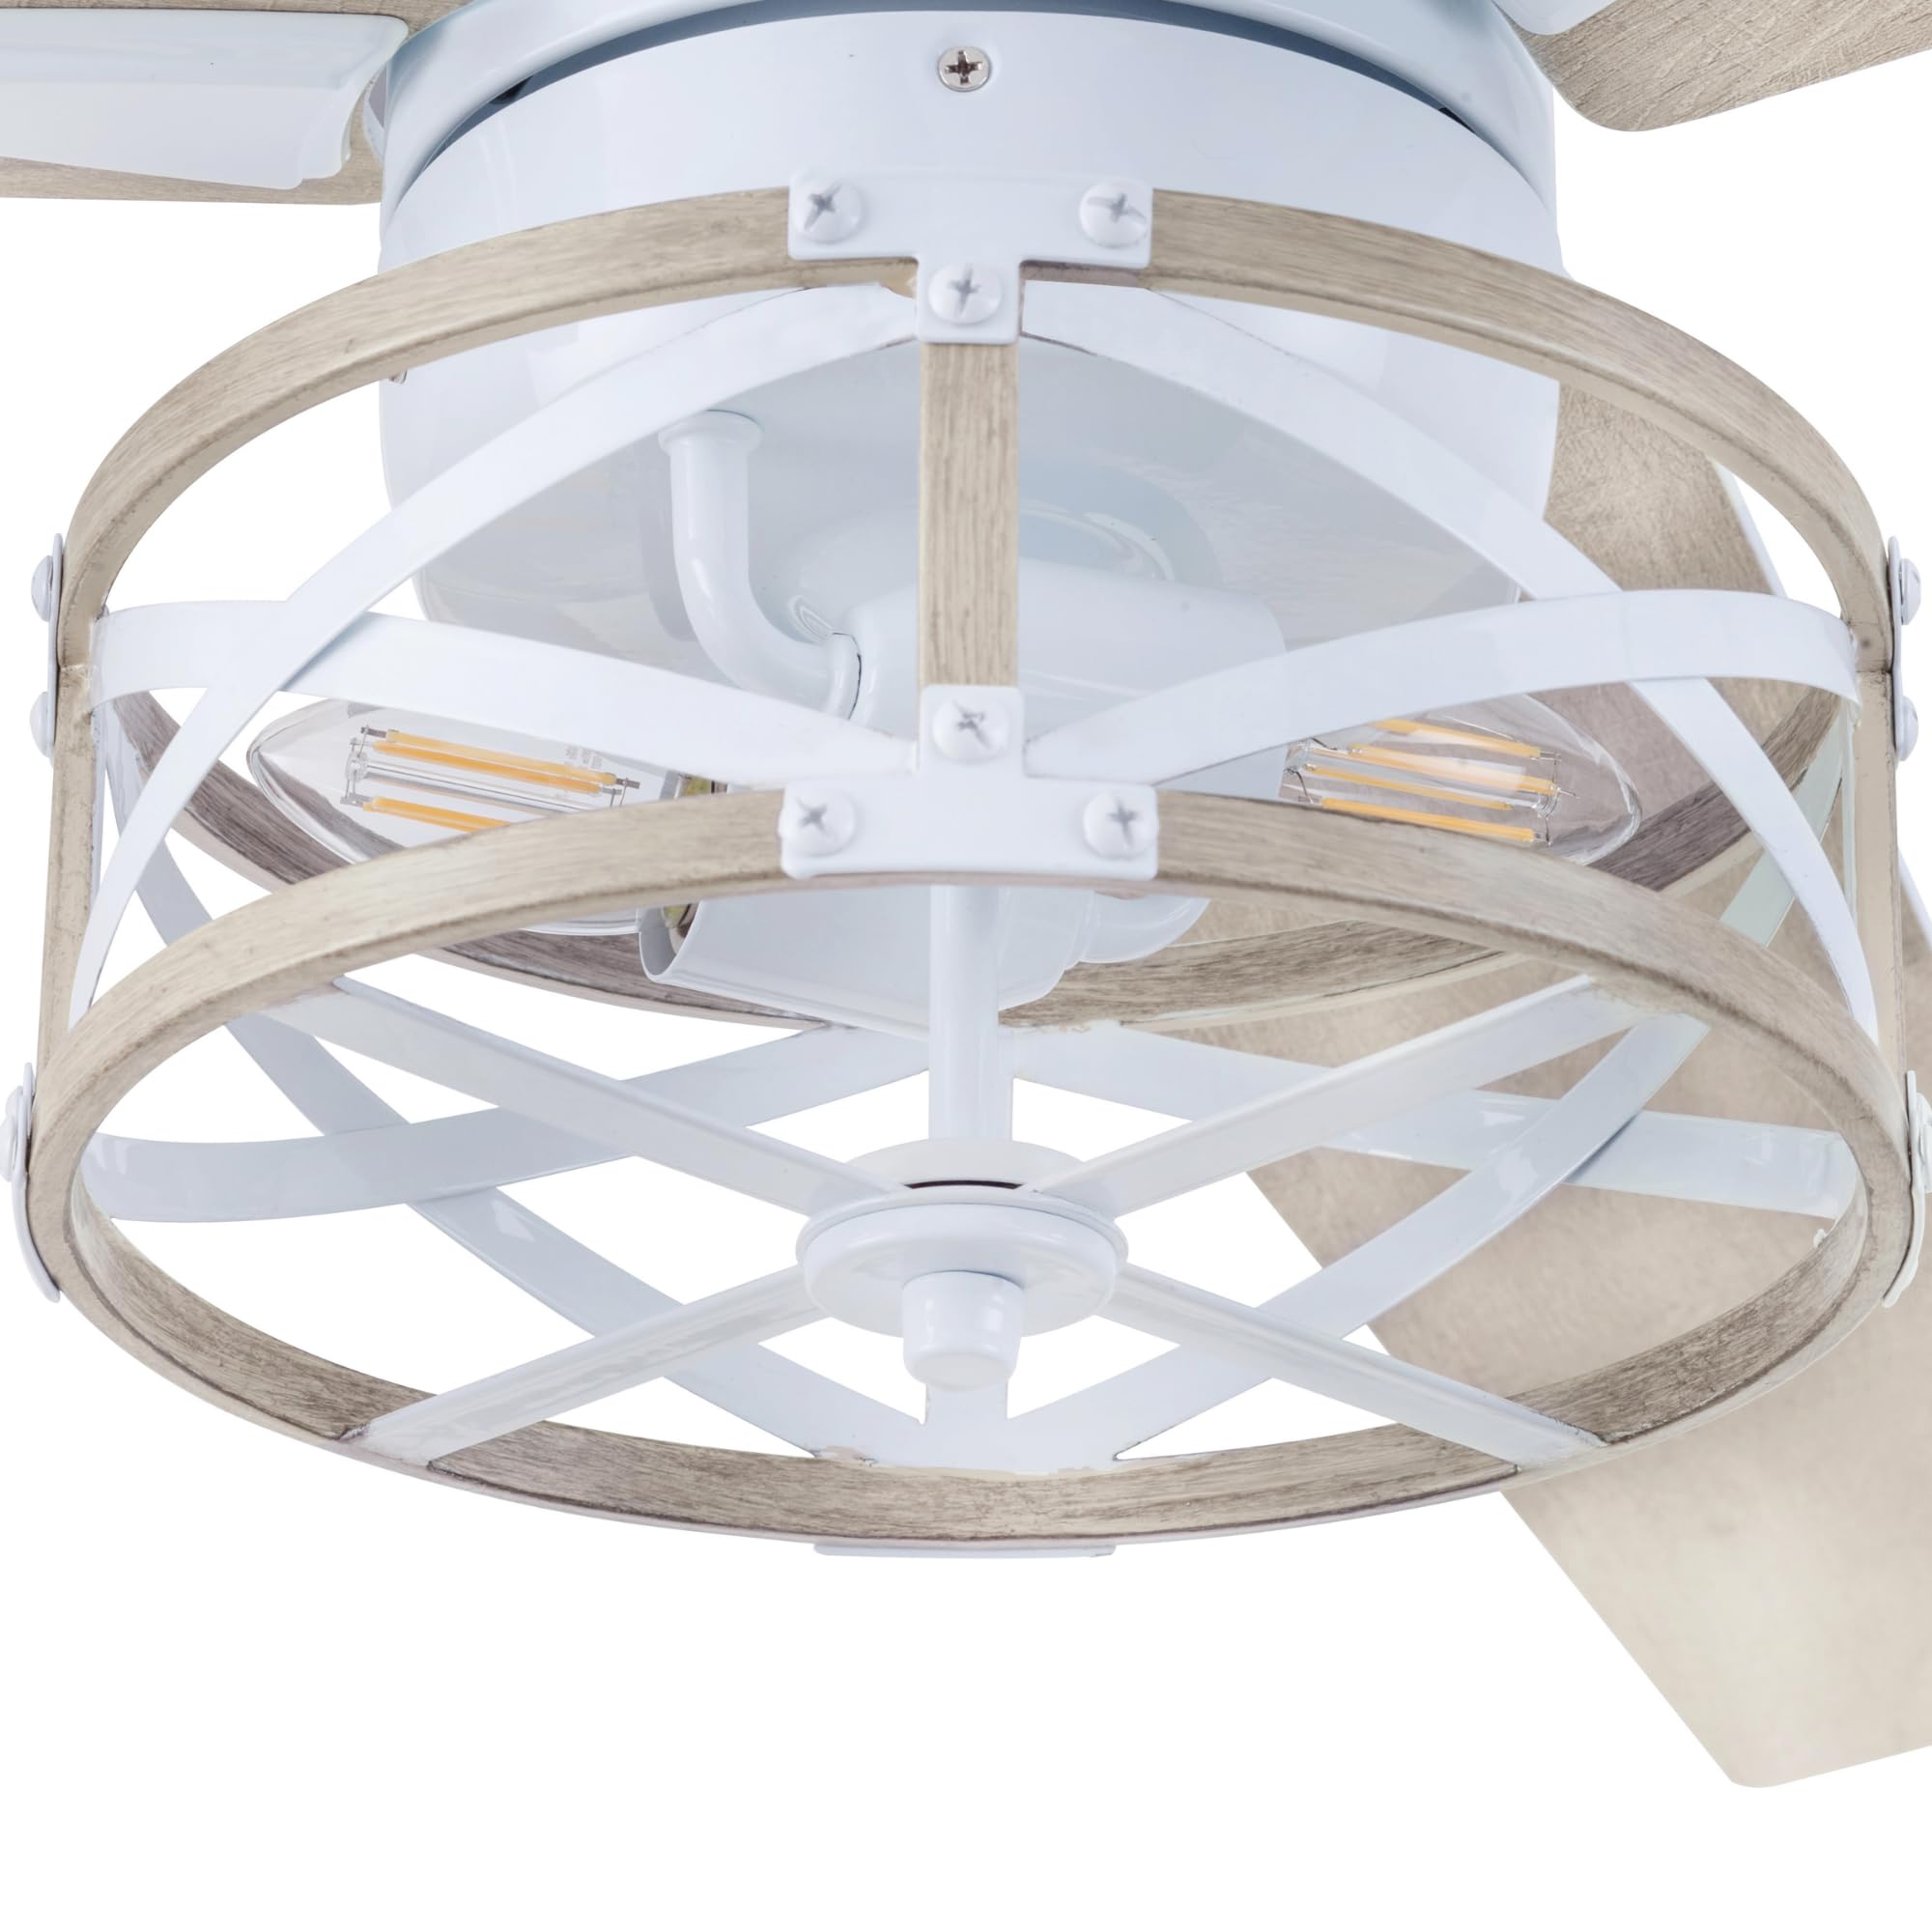 Prominence Home Thedas, 52 Inch Caged Indoor LED Ceiling Fan with Light, Remote, Dual Mounting Options, 3 Modern Dual Finish Blades, Reversible Motor